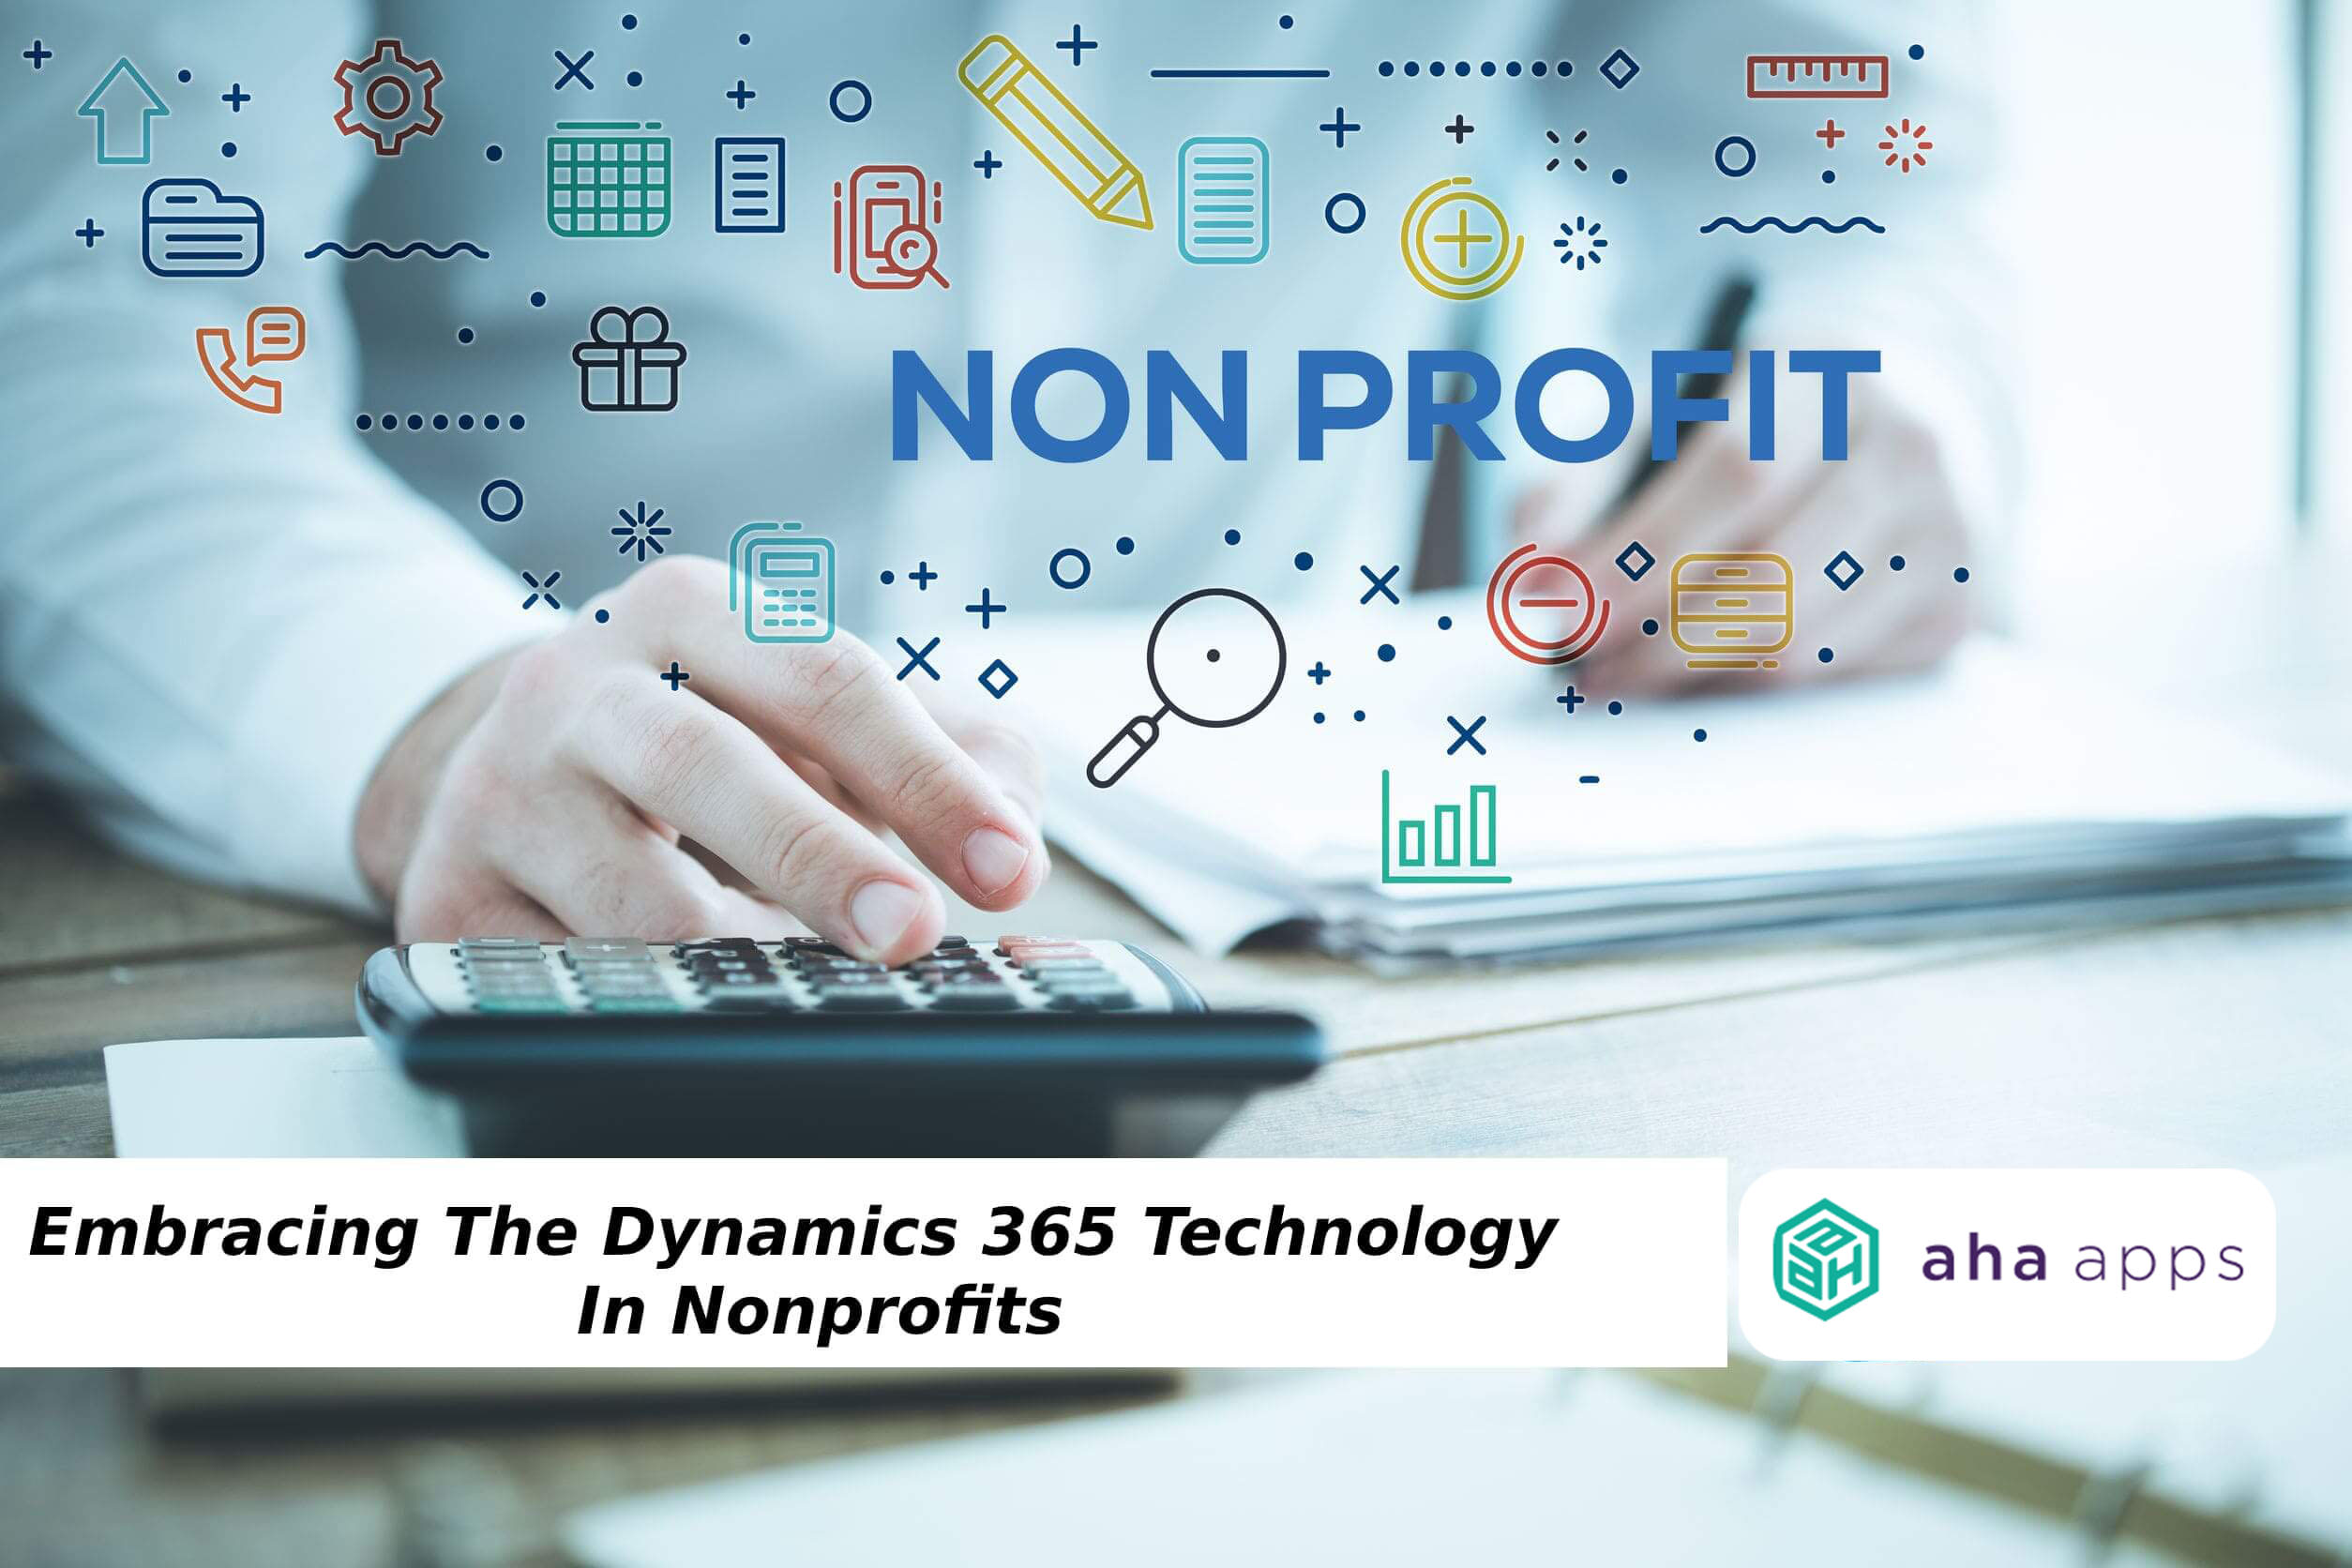 Embracing the Dynamics 365 technology in Nonprofits - AhaApps